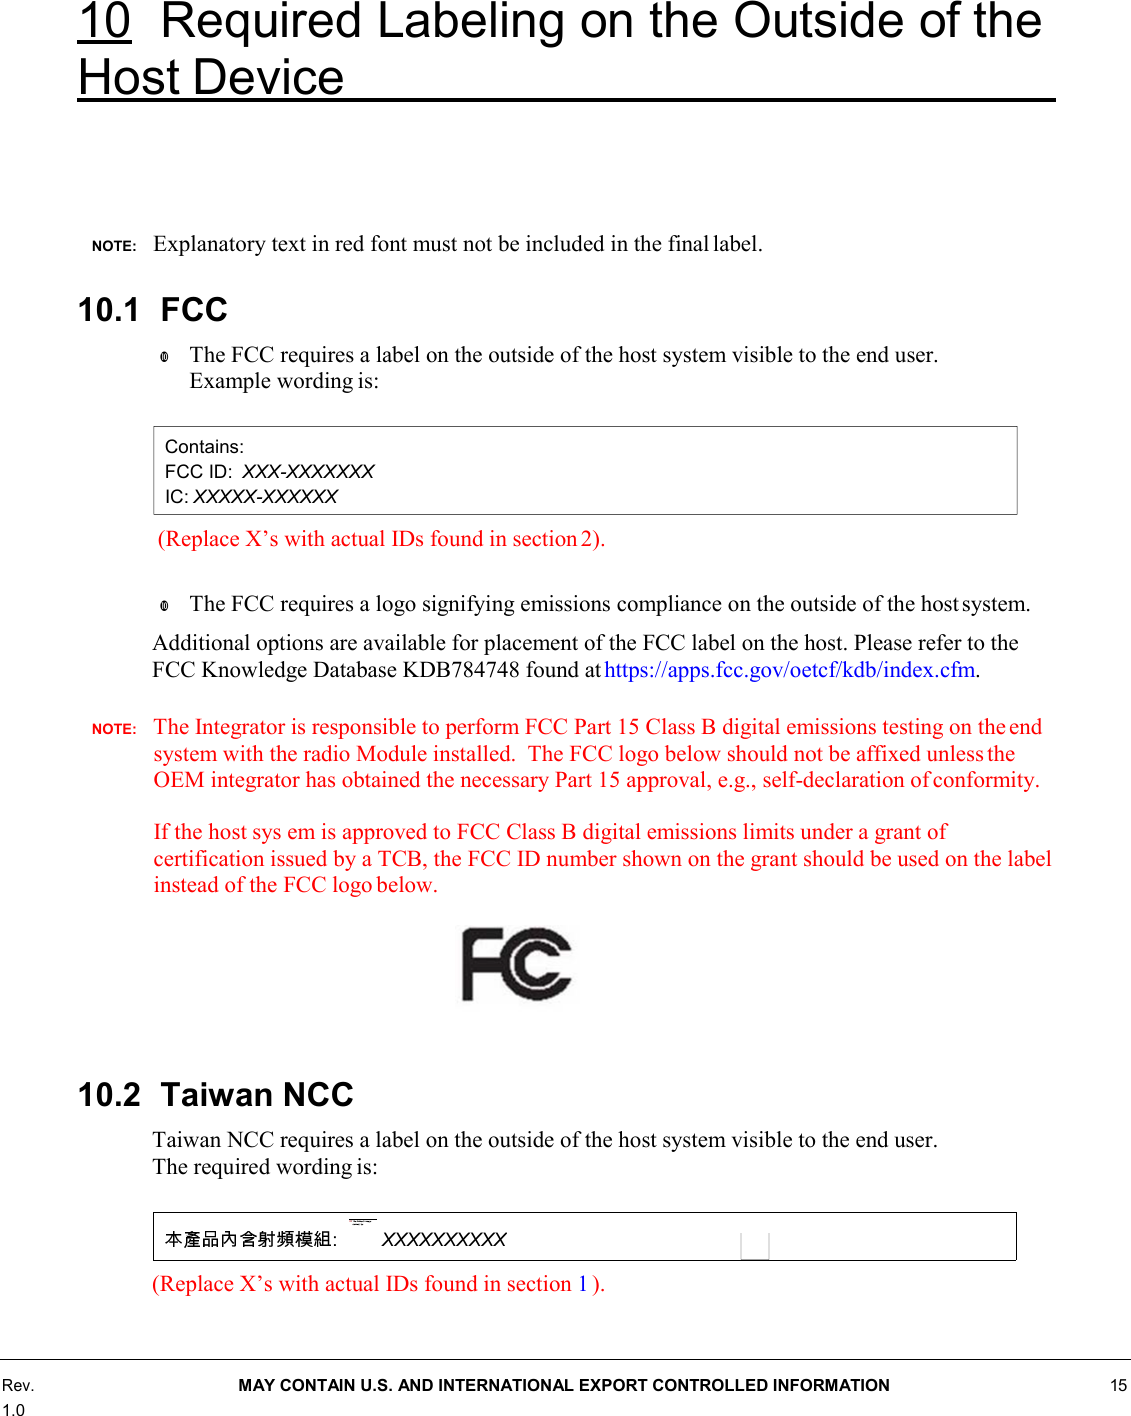 10 Required Labeling on the Outside of the Host Device        NOTE:    Explanatory text in red font must not be included in the final label.  10.1 FCC w The FCC requires a label on the outside of the host system visible to the end user. Example wording is:   (Replace X’s with actual IDs found in section 2).  w The FCC requires a logo signifying emissions compliance on the outside of the host system. Additional options are available for placement of the FCC label on the host. Please refer to the FCC Knowledge Database KDB784748 found at https://apps.fcc.gov/oetcf/kdb/index.cfm.  NOTE:    The Integrator is responsible to perform FCC Part 15 Class B digital emissions testing on the end system with the radio Module installed.  The FCC logo below should not be affixed unless the OEM integrator has obtained the necessary Part 15 approval, e.g., self-declaration of conformity.  If the host sys em is approved to FCC Class B digital emissions limits under a grant of certification issued by a TCB, the FCC ID number shown on the grant should be used on the label instead of the FCC logo below.     10.2 Taiwan NCC Taiwan NCC requires a label on the outside of the host system visible to the end user. The required wording is:   (Replace X’s with actual IDs found in section 1 ).      Rev. 1.0 MAY CONTAIN U.S. AND INTERNATIONAL EXPORT CONTROLLED INFORMATION 15 Contains: FCC ID:  XXX-XXXXXXX IC: XXXXX-XXXXXX : XXXXXXXXXX 